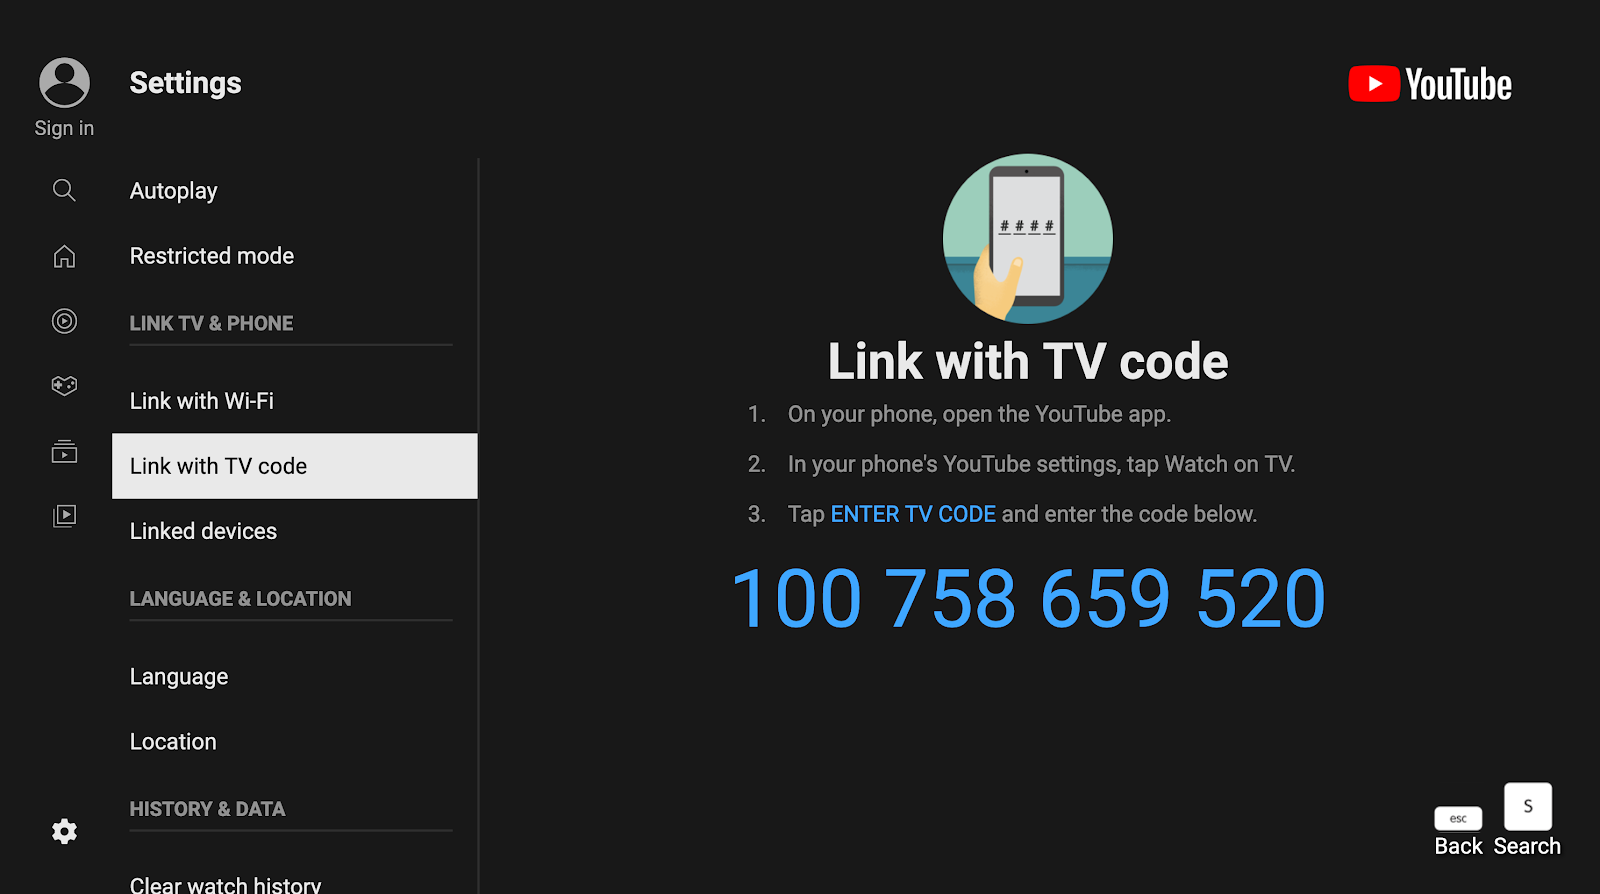 The YouTube TV "Link with TV code" settings page, showing the TV Code PIN